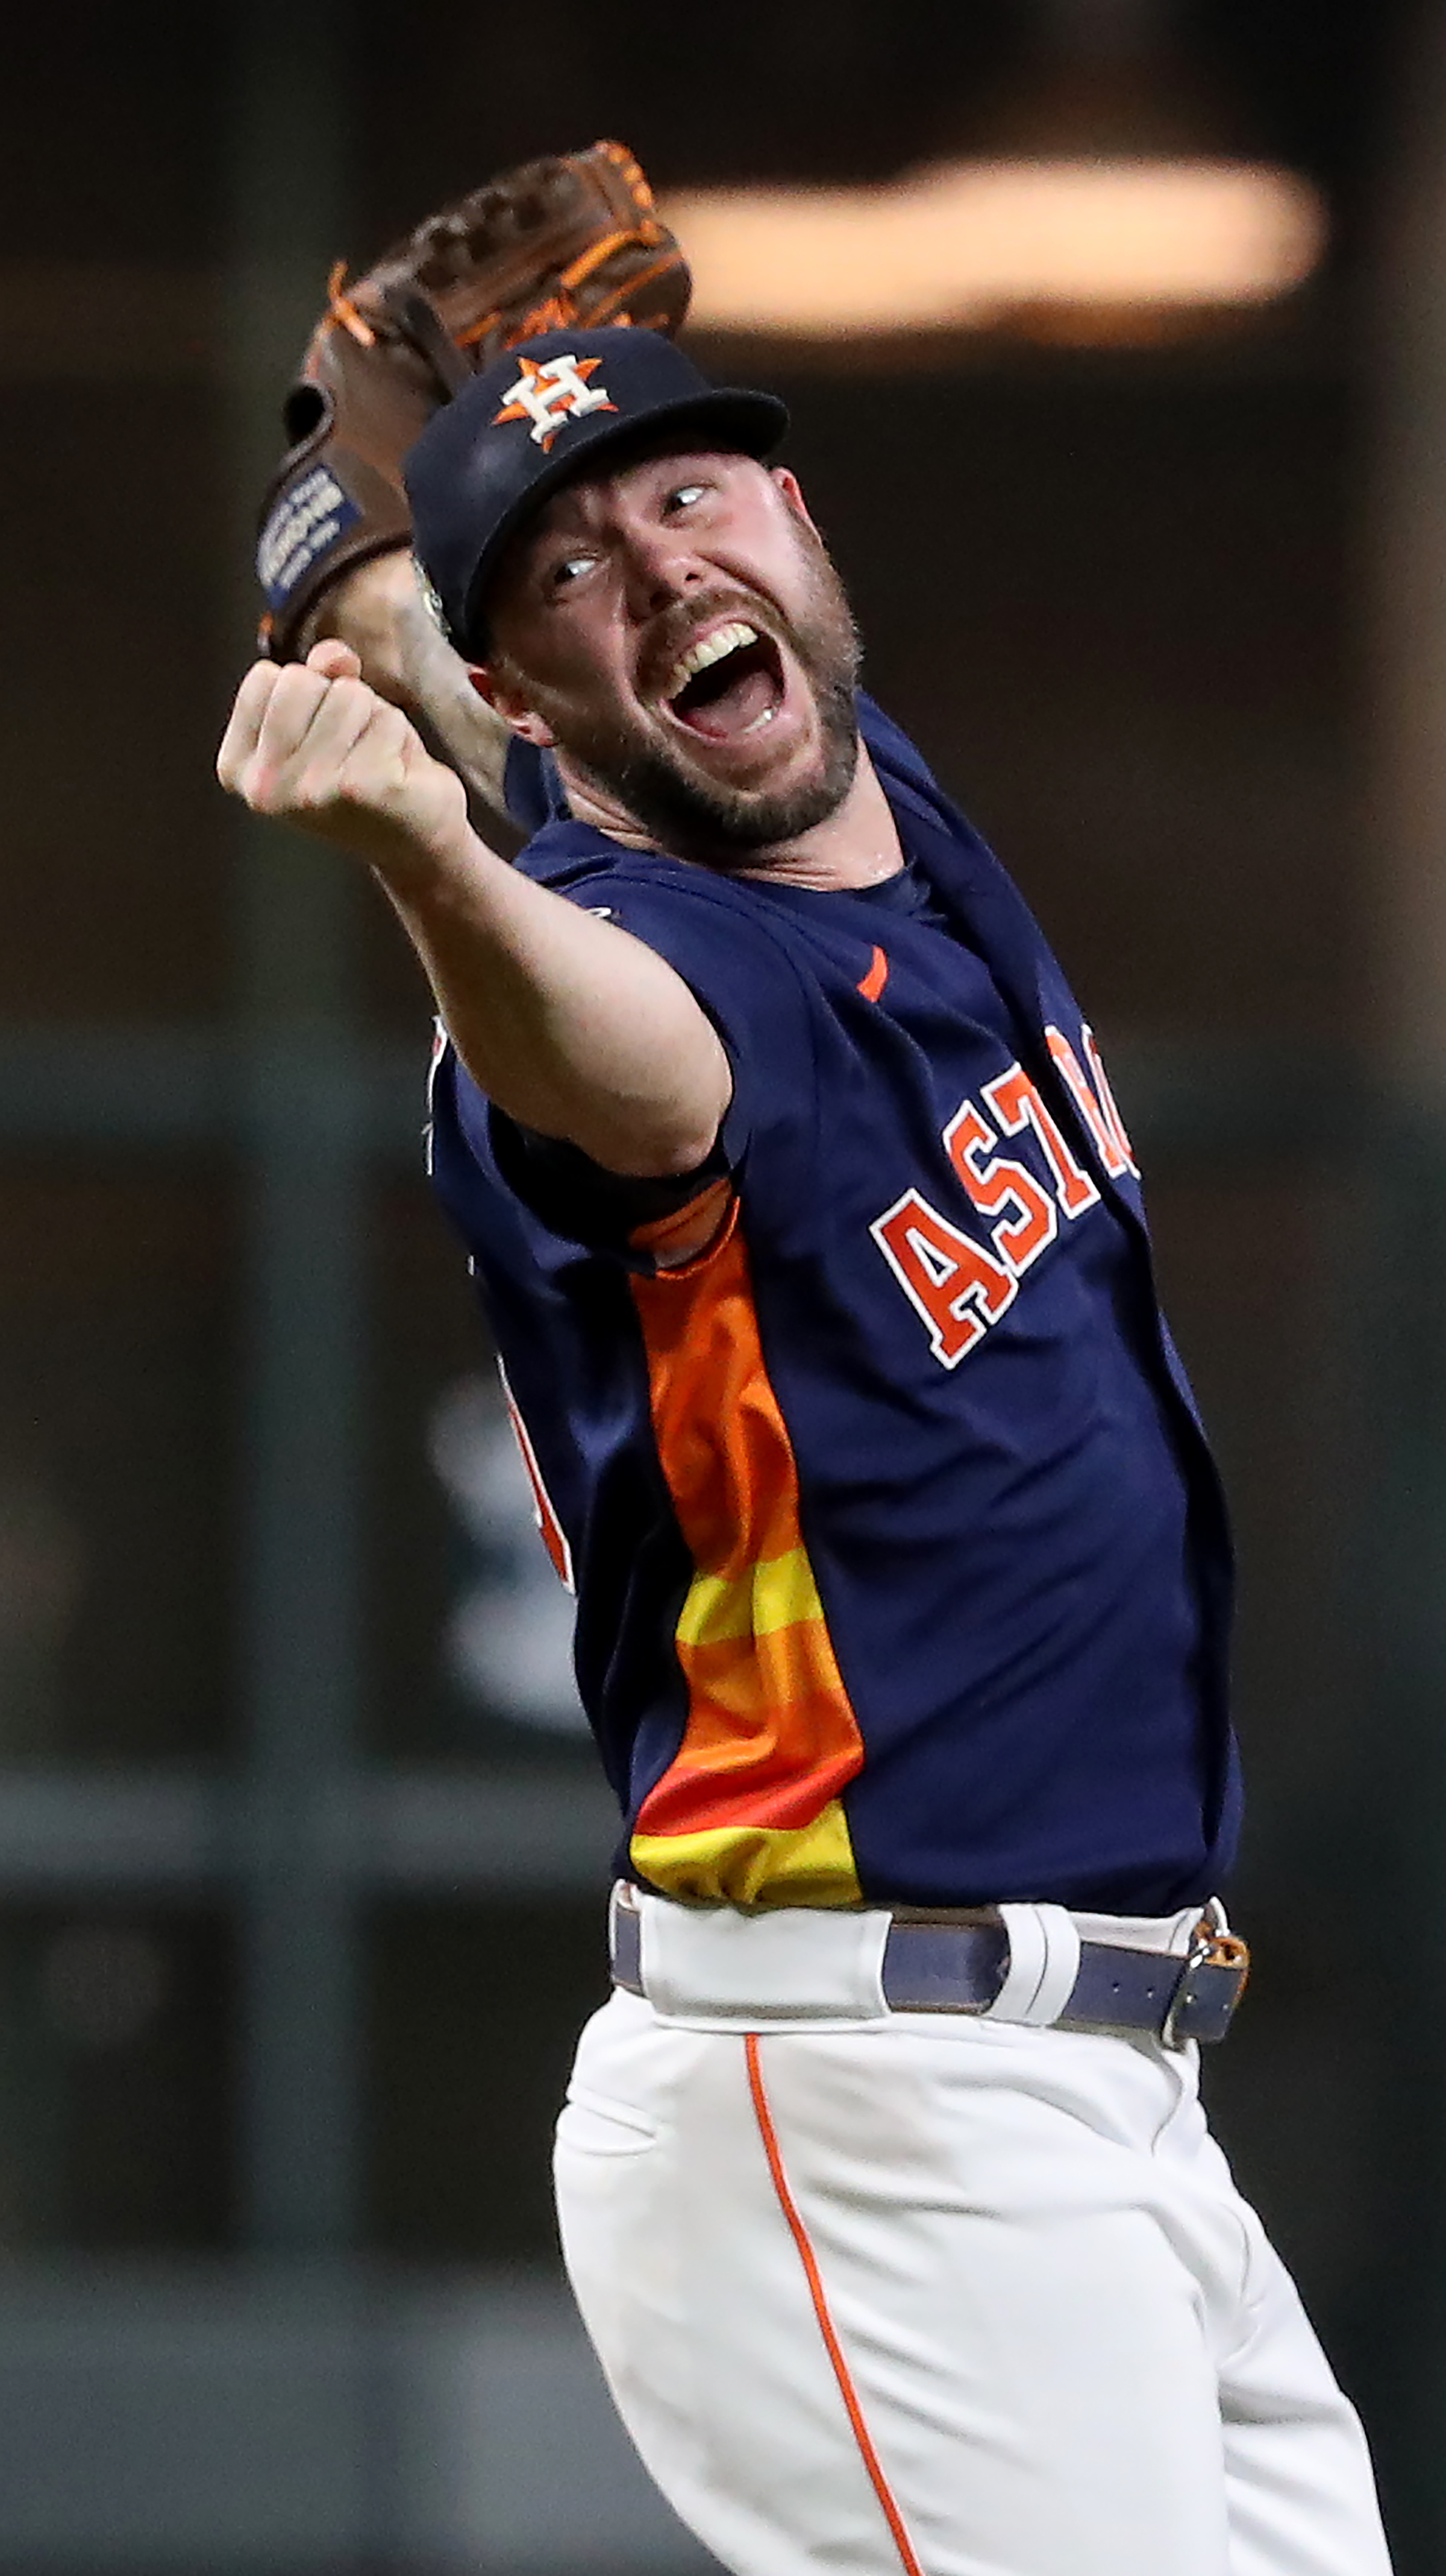 Astros fan who took the Chas McCormick dirt imprint photo